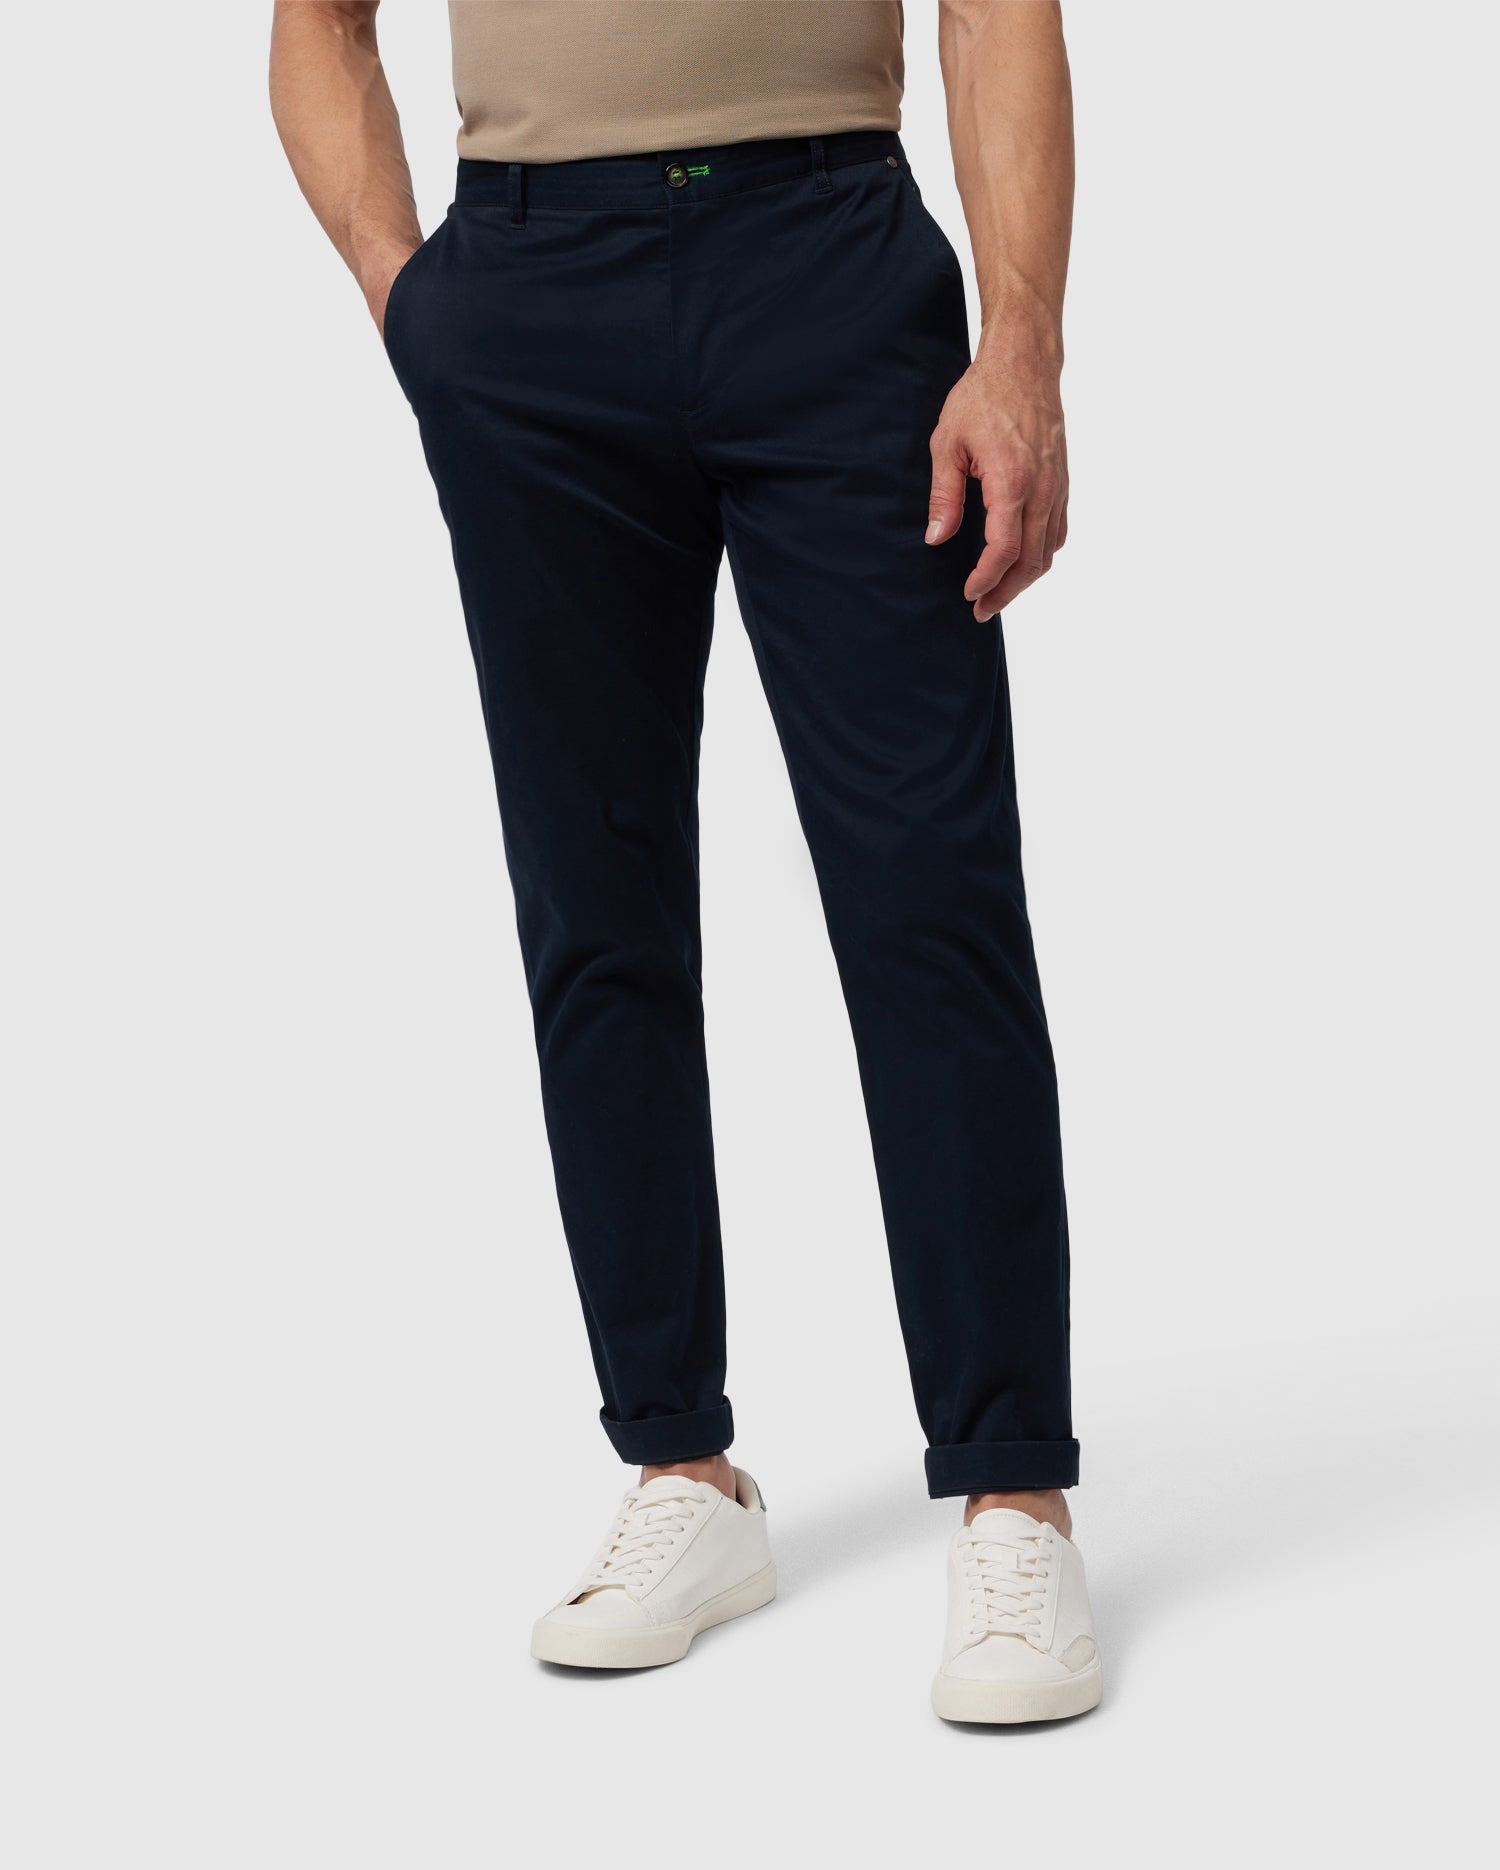 Buy Blue Trousers & Pants for Men by AMERICAN EAGLE Online | Ajio.com